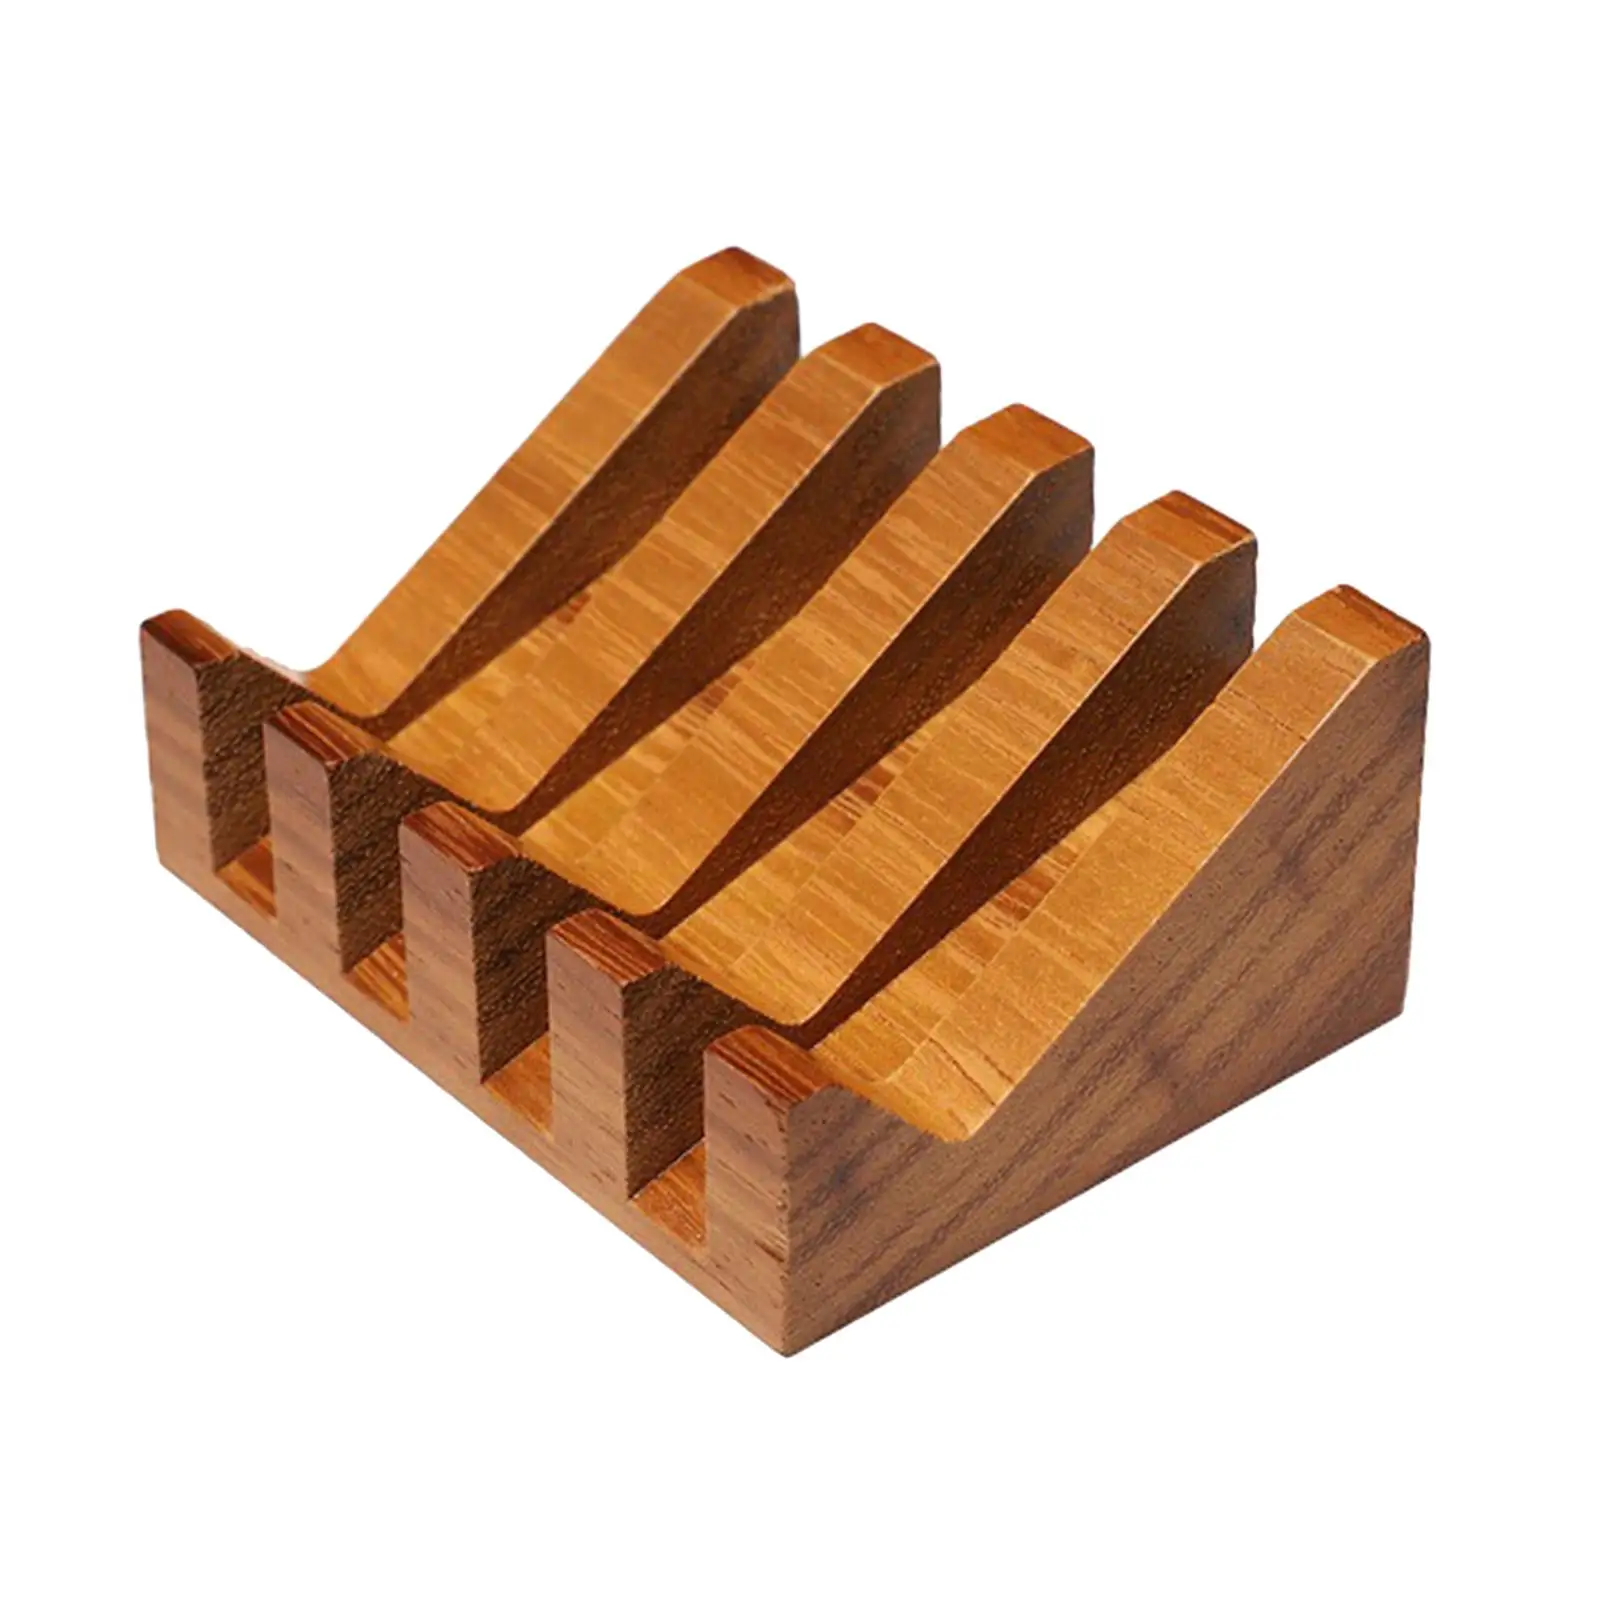 Wooden Soap Dish Home Decor Decorative Tabletop Soap Tray Wooden Soap Holder for Sink Kitchen Bathtub Countertop Bathroom